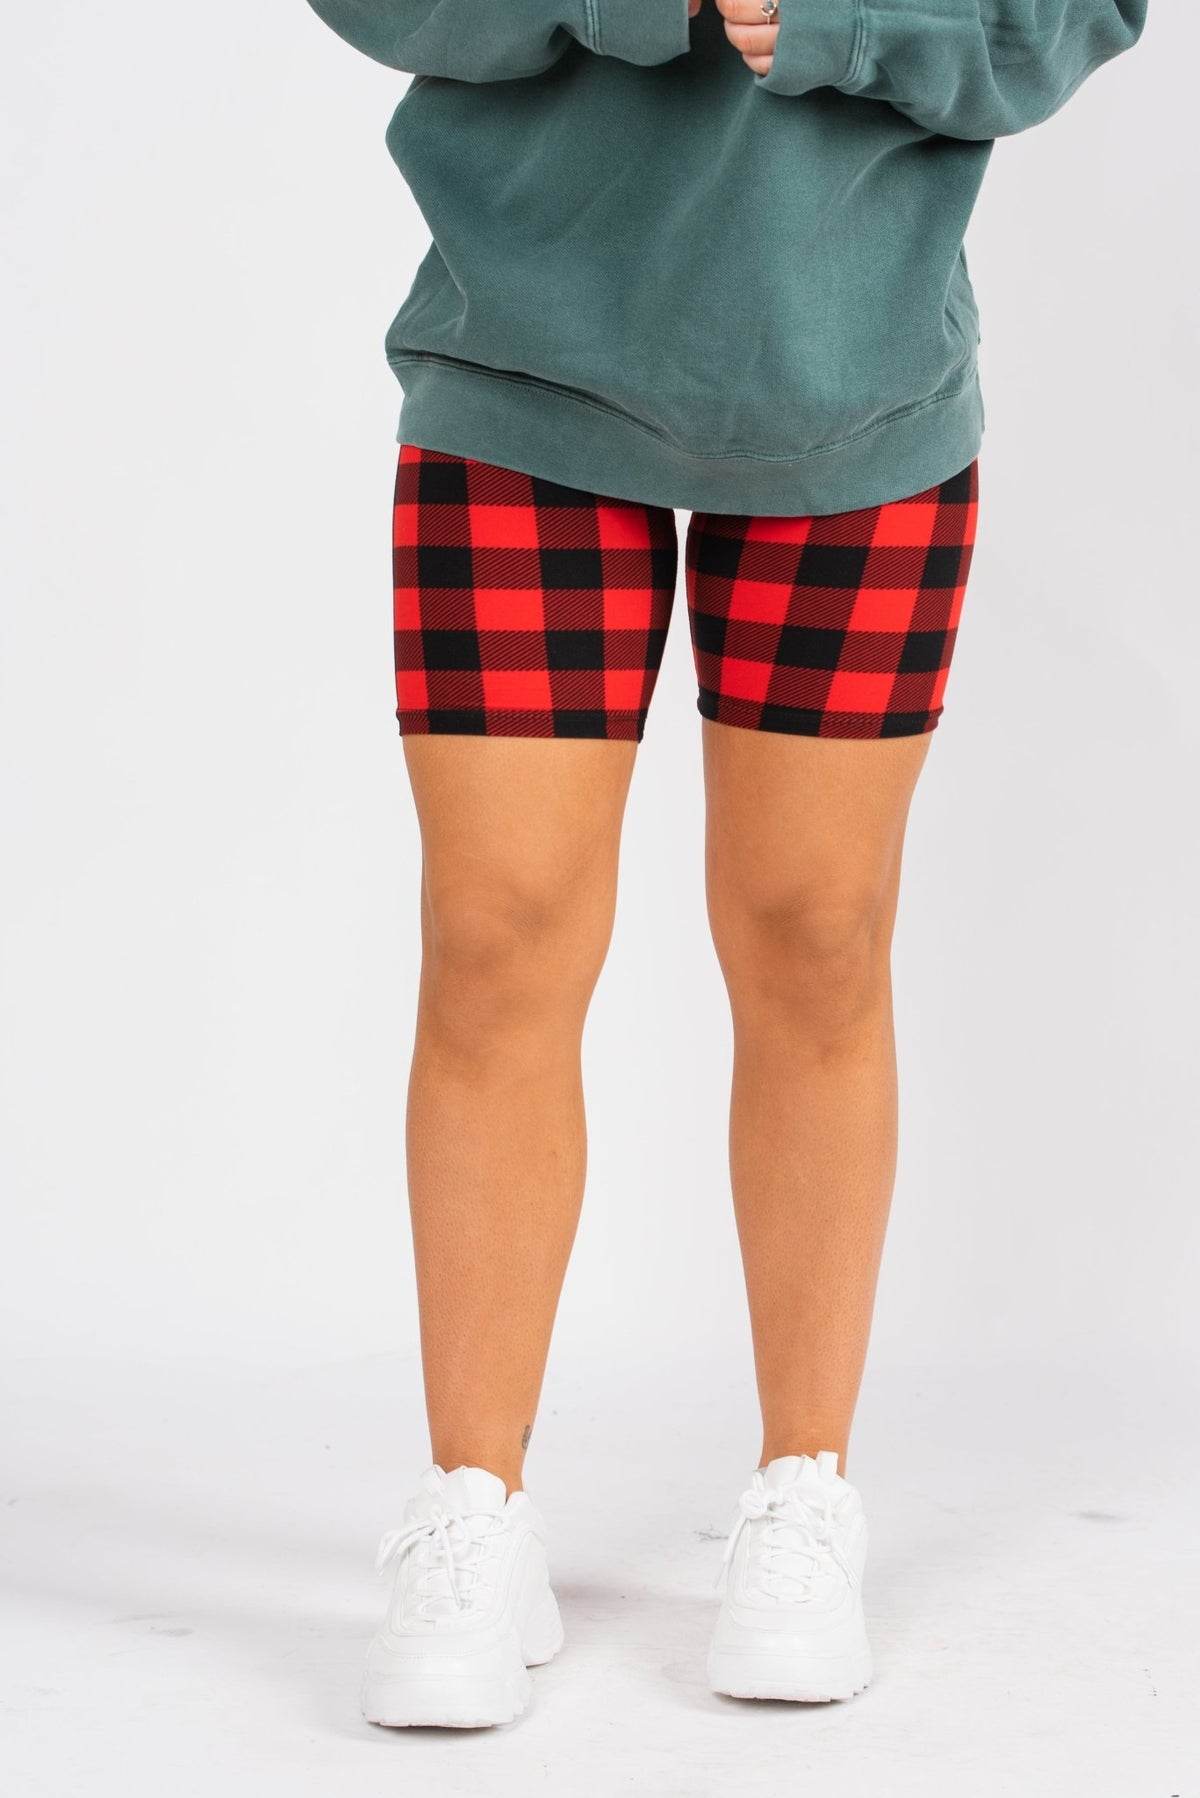 Gingham printed biker shorts red/black - Trendy Holiday Apparel at Lush Fashion Lounge Boutique in Oklahoma City